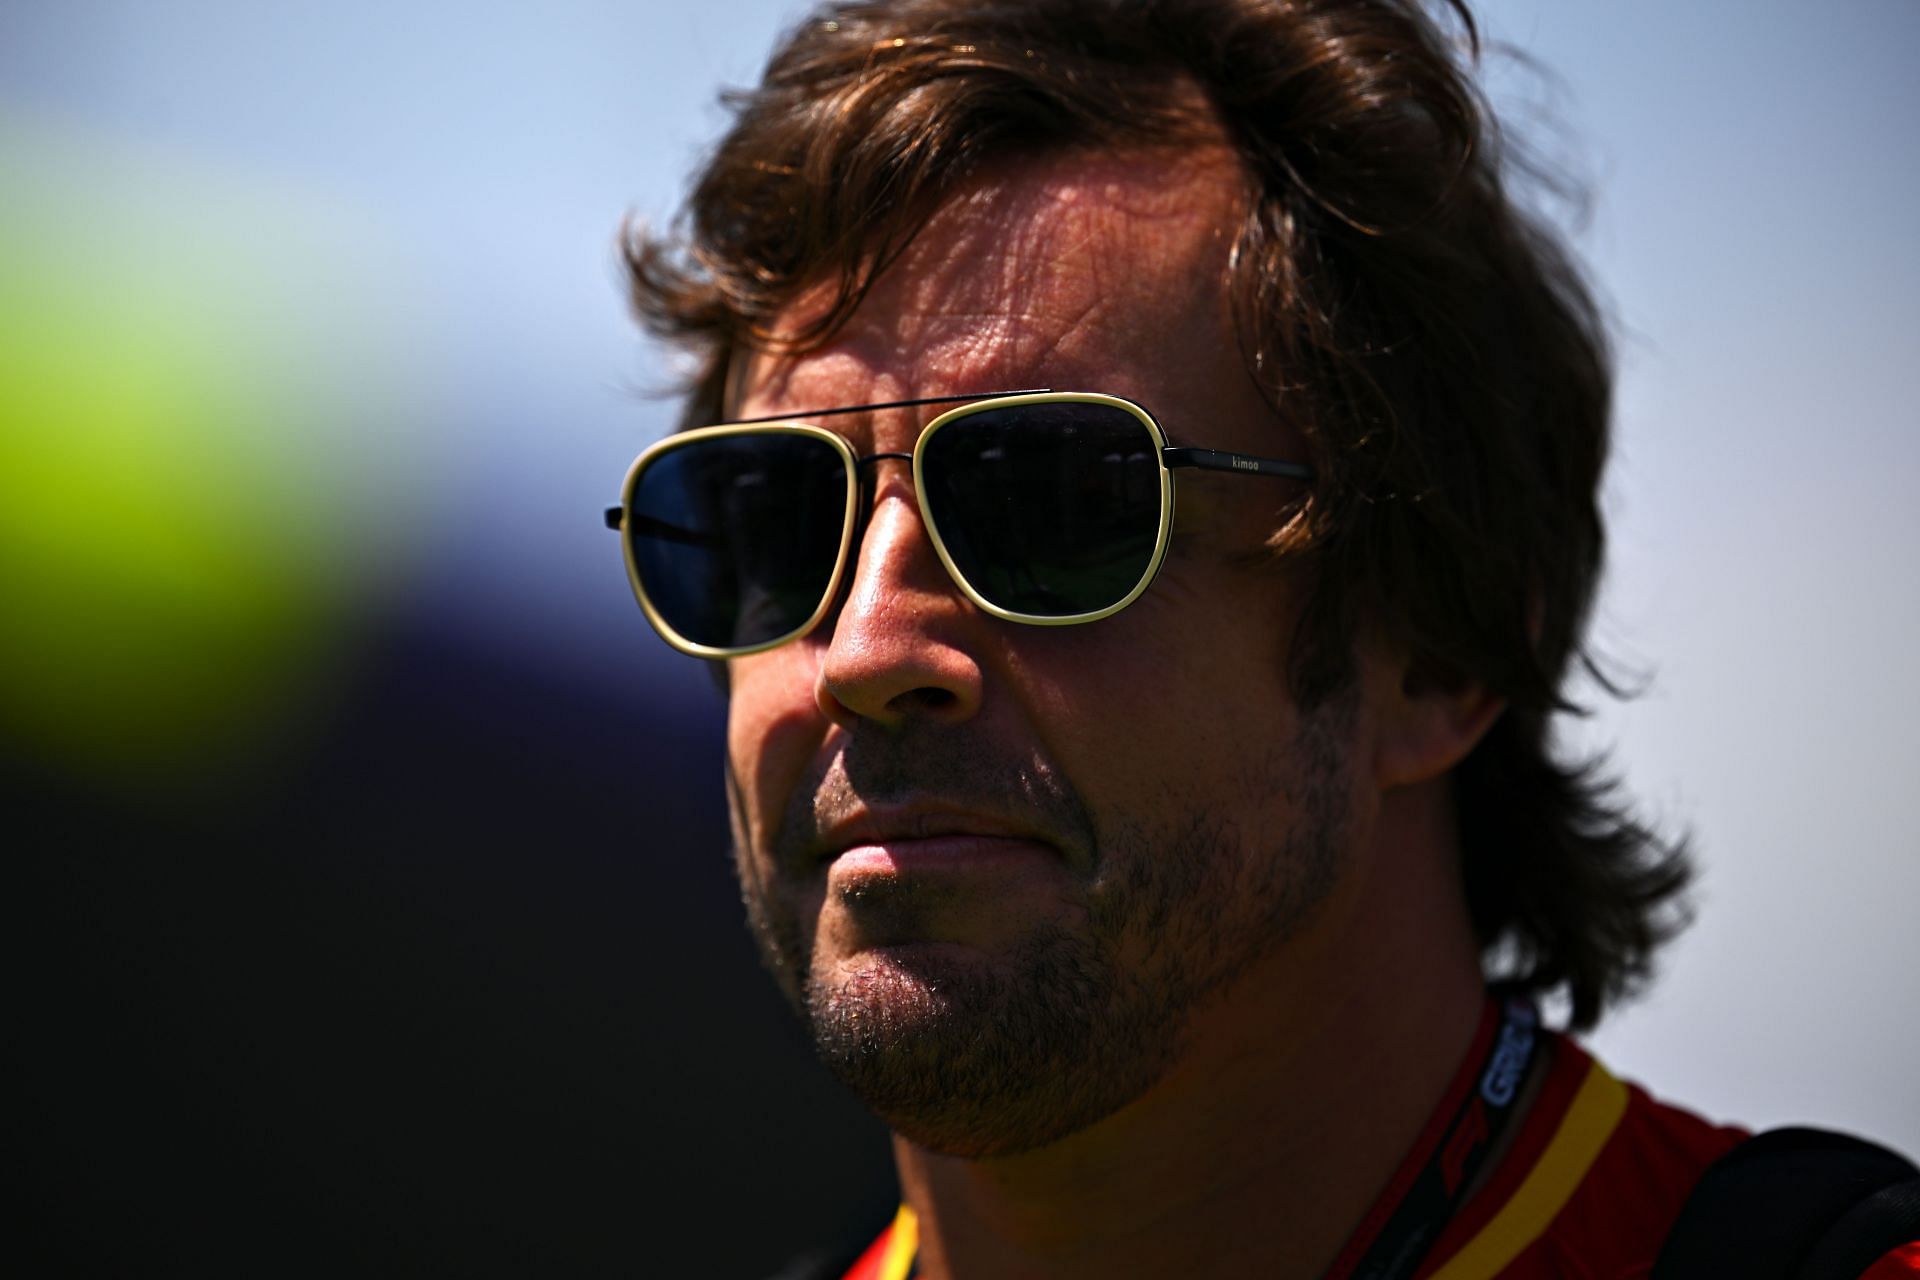 Fernando Alonso was left unimpressed with race control&#039;s handling of Miami GP safety concerns